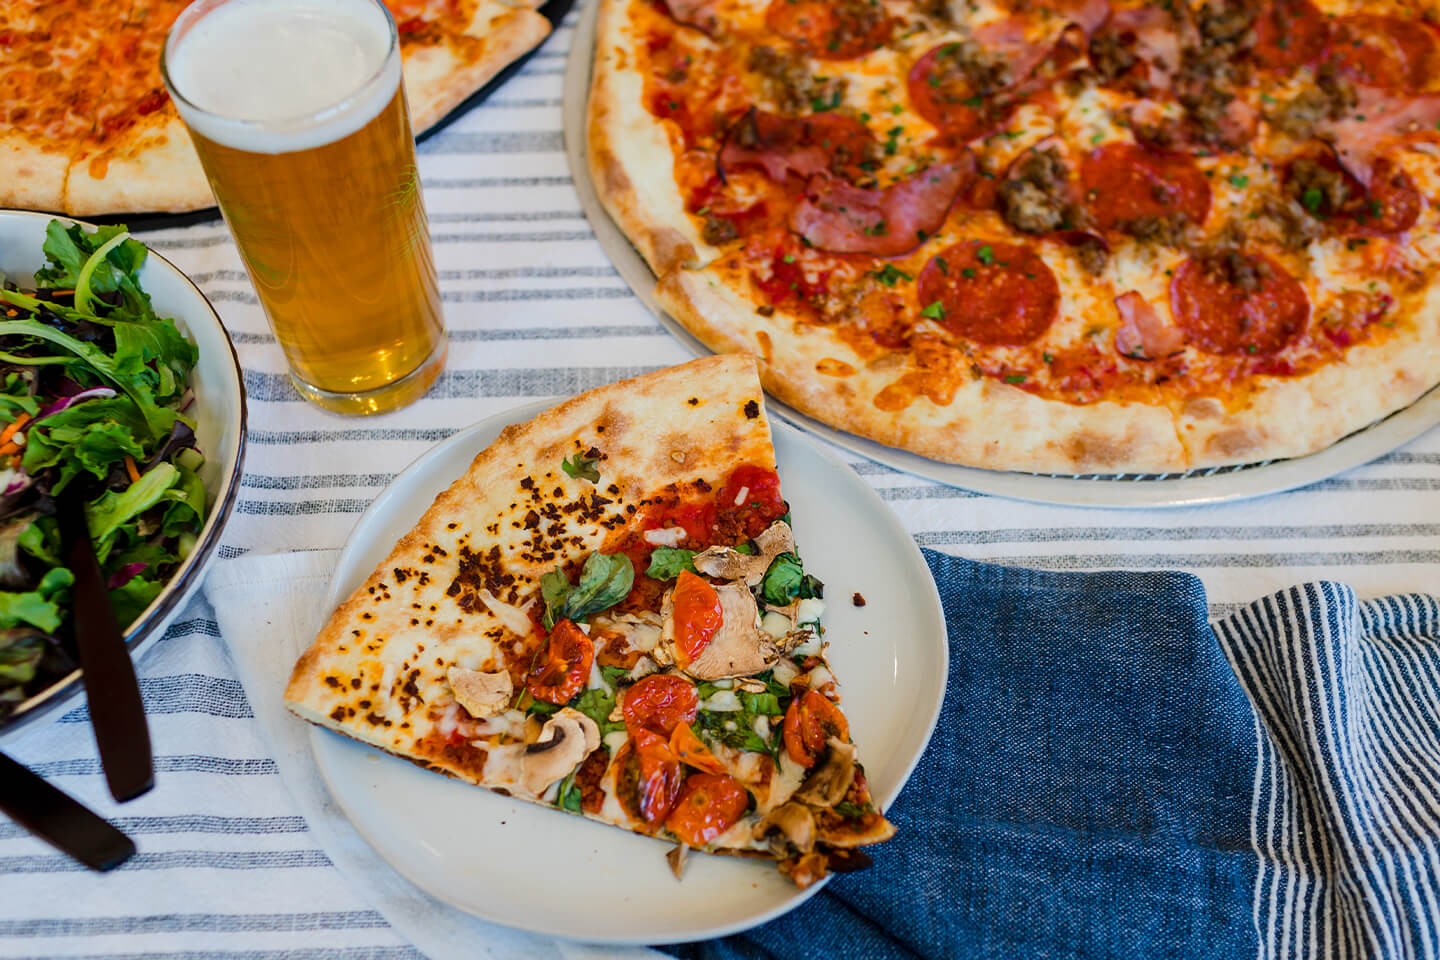 Picnic setting featuring a whole pizza, side salad, beer, and slice of pizza on a plate.